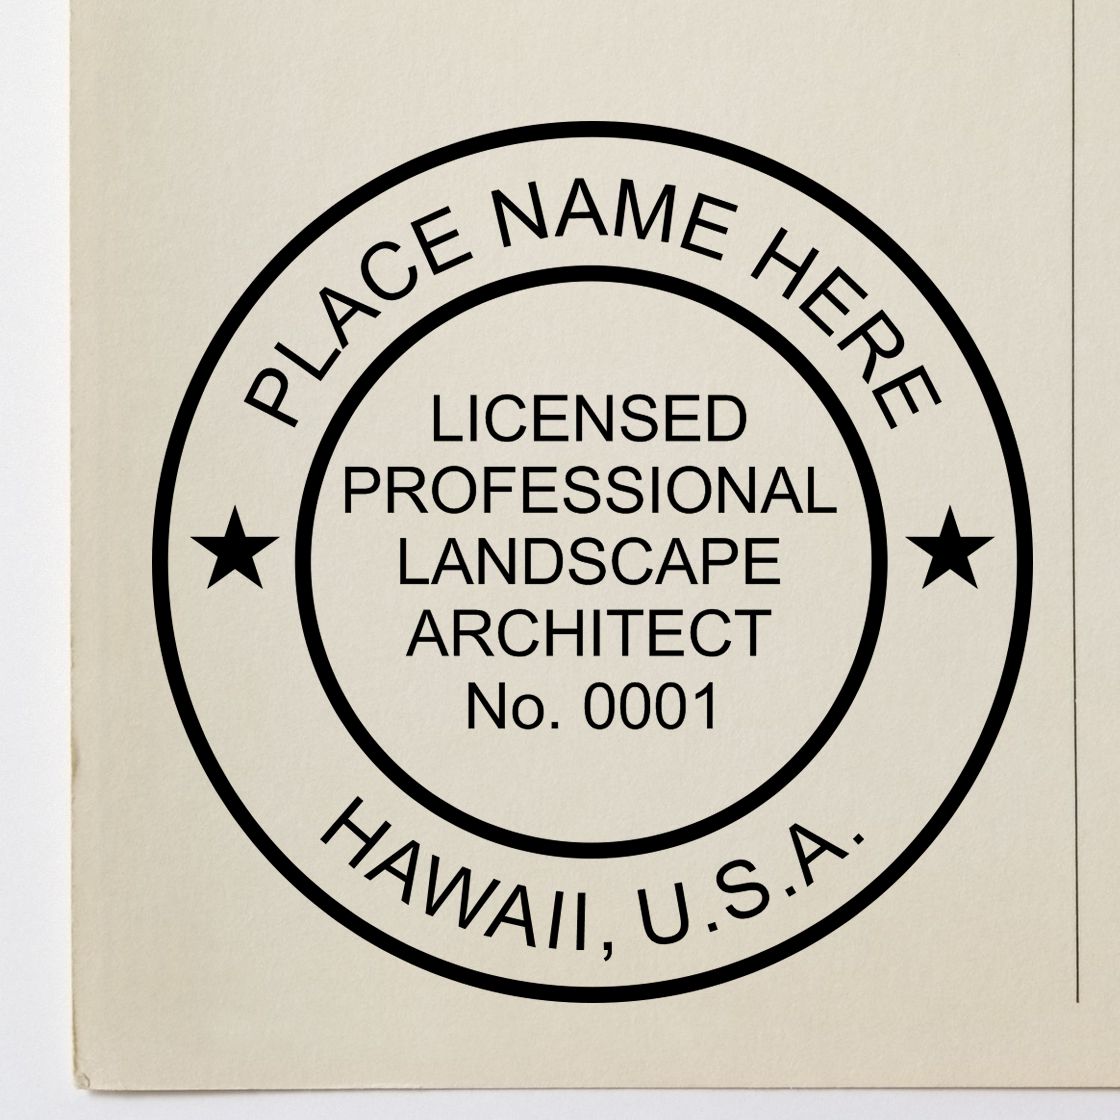 This paper is stamped with a sample imprint of the Slim Pre-Inked Hawaii Landscape Architect Seal Stamp, signifying its quality and reliability.